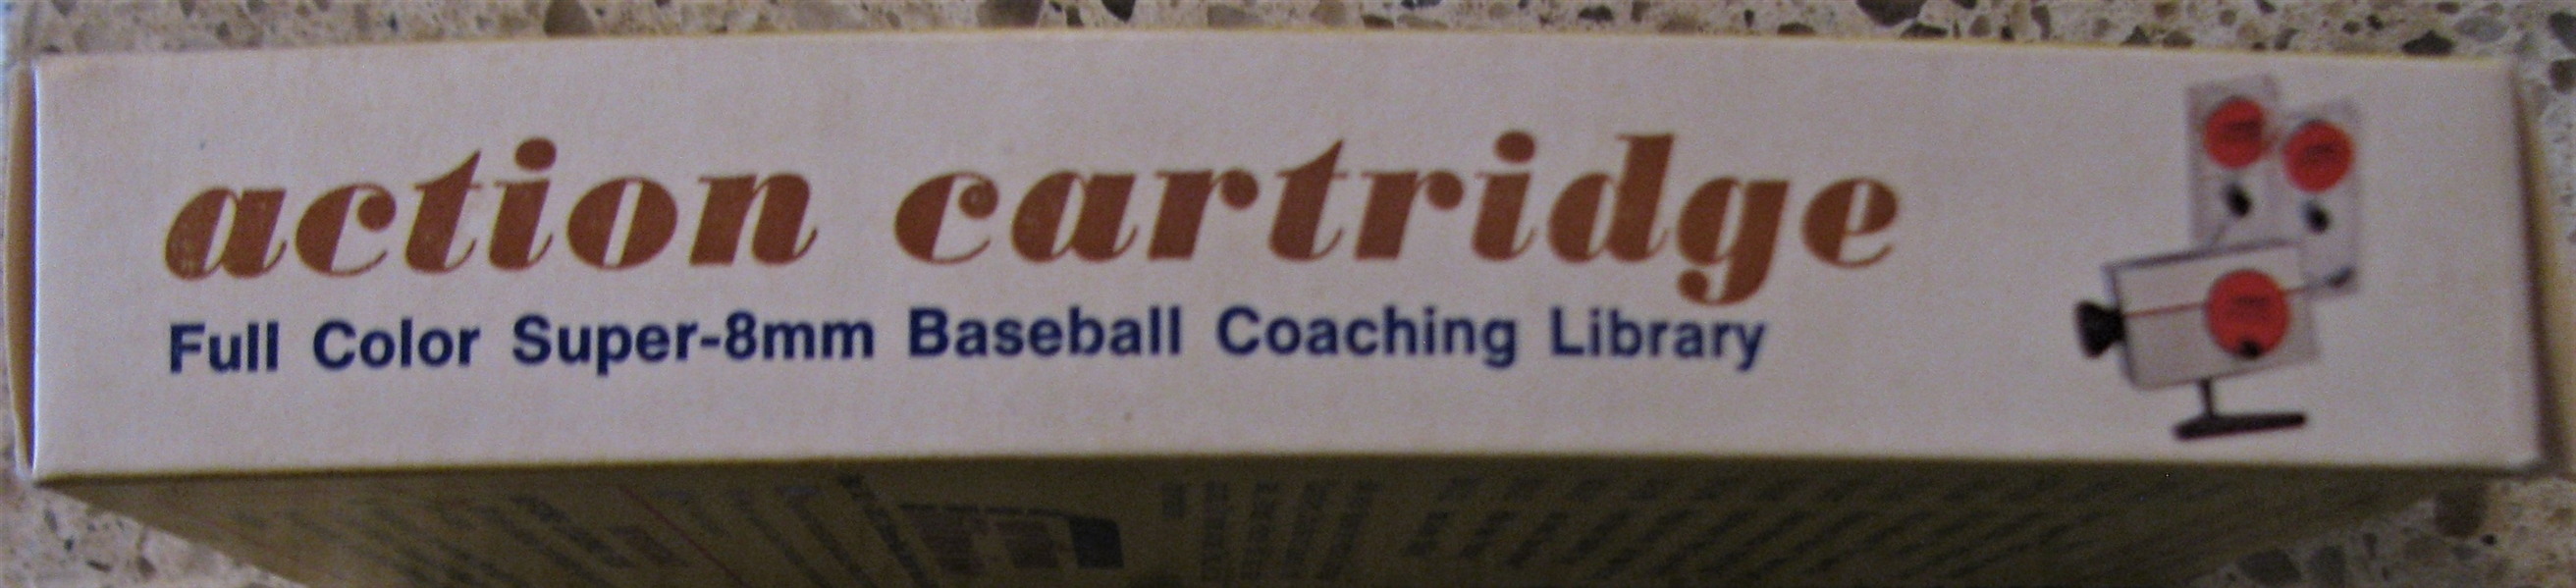 4 BASEBALL COACHING LIBRARY COLOR ACTION CARTRIDGES w/AARON - ROBINSO - DAVIS - FREEHAN